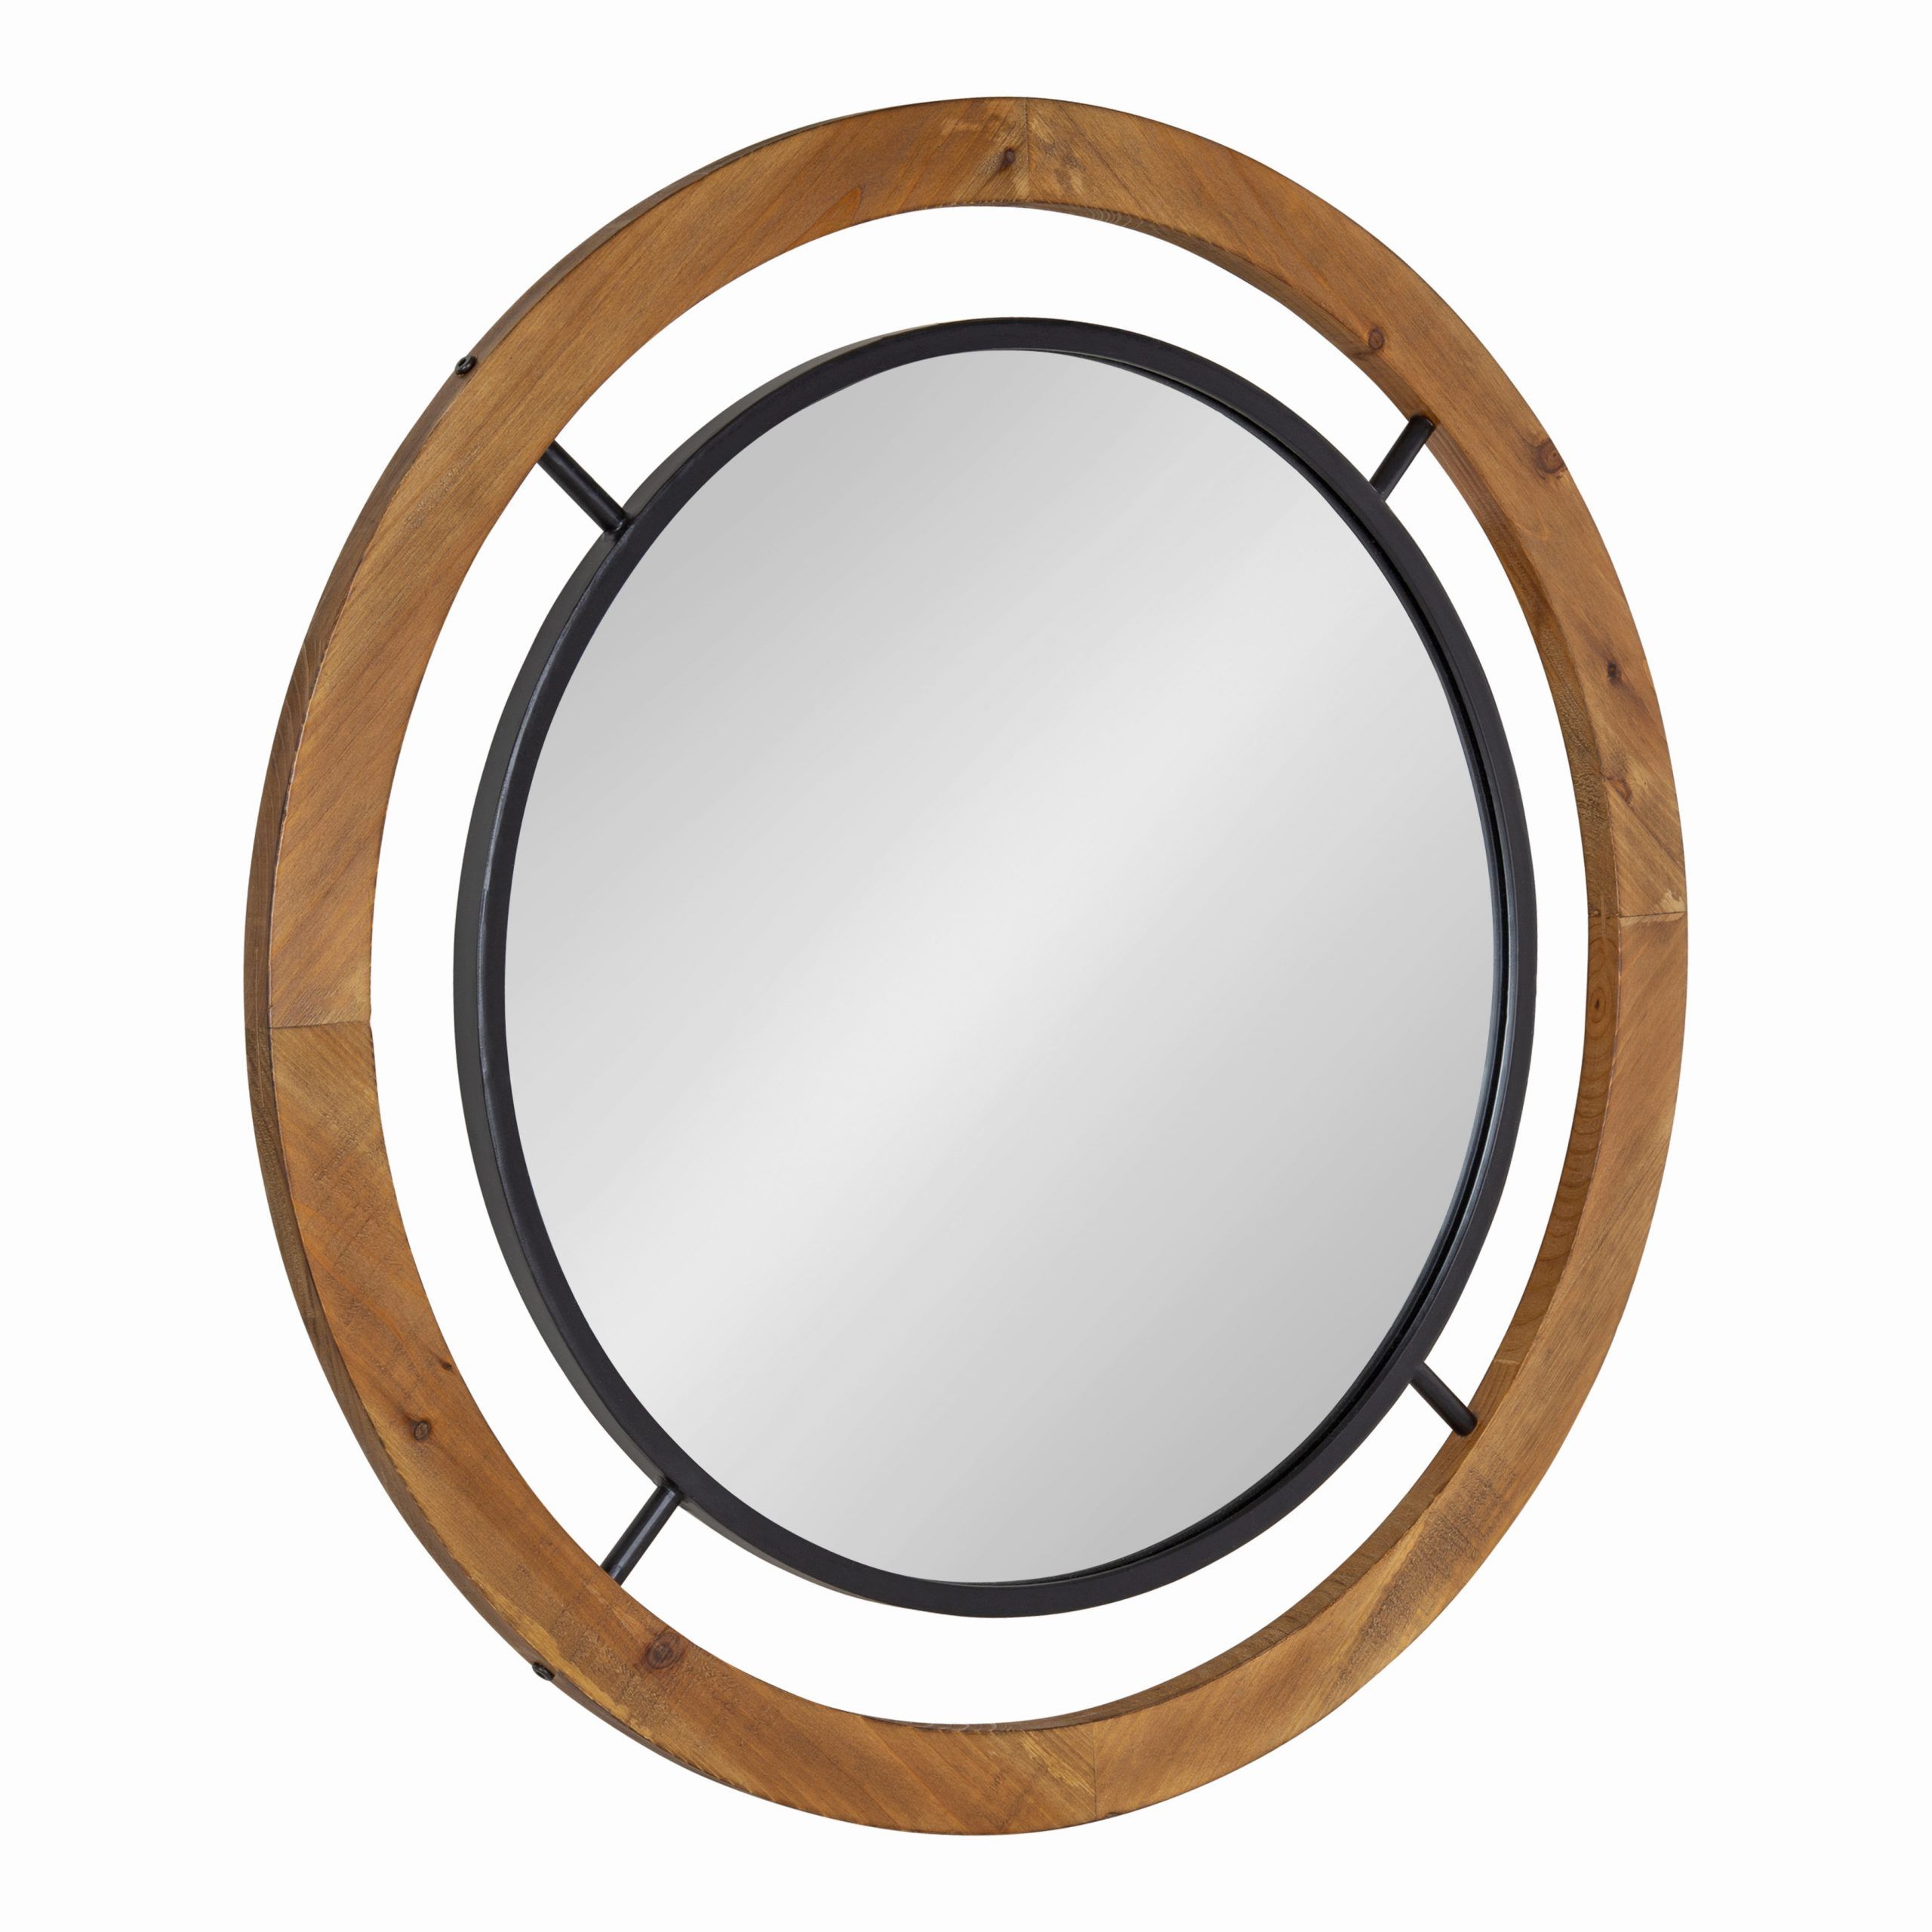 Kate And Laurel Whalen Rustic Wood Wall Mirror, 32" X 32", Brown With Mocha Brown Wall Mirrors (View 2 of 15)